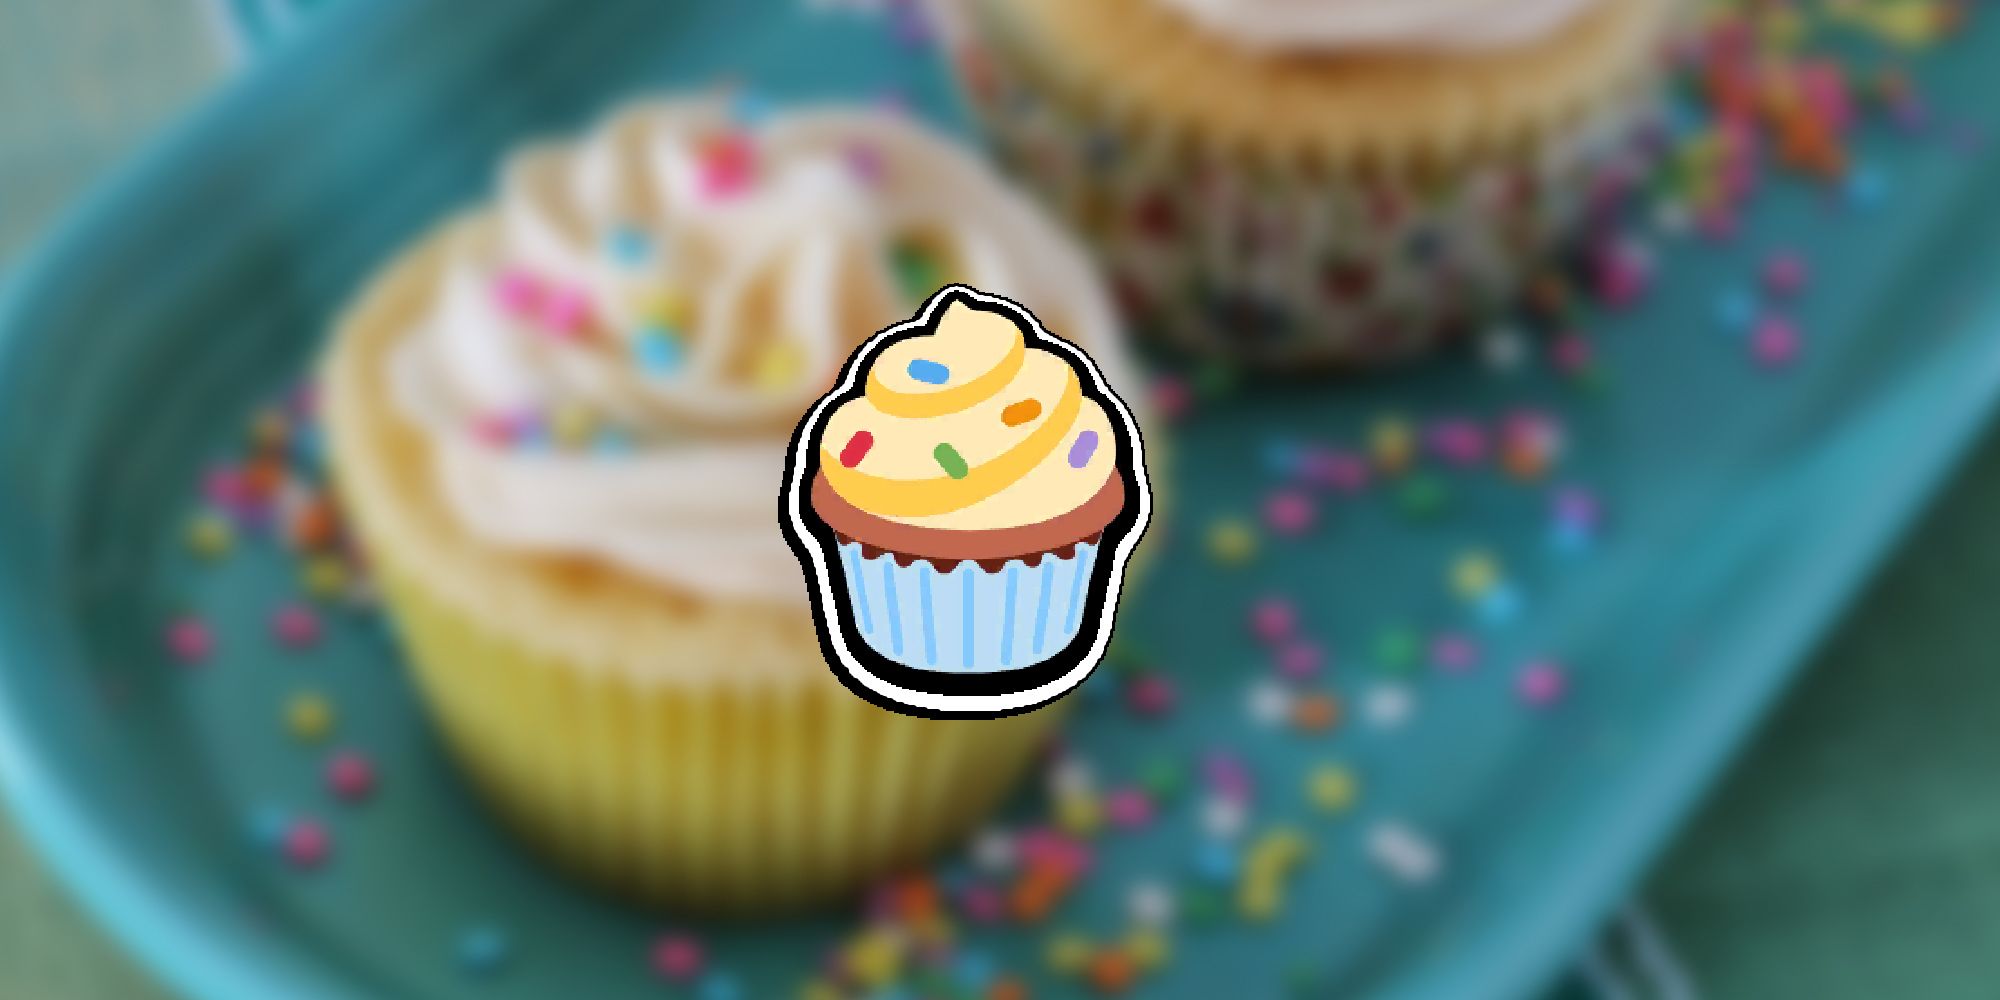 Super Auto Pets - In-Game Cupcake Item PNG Overlaid On Image Of Similar Looking Cupcake